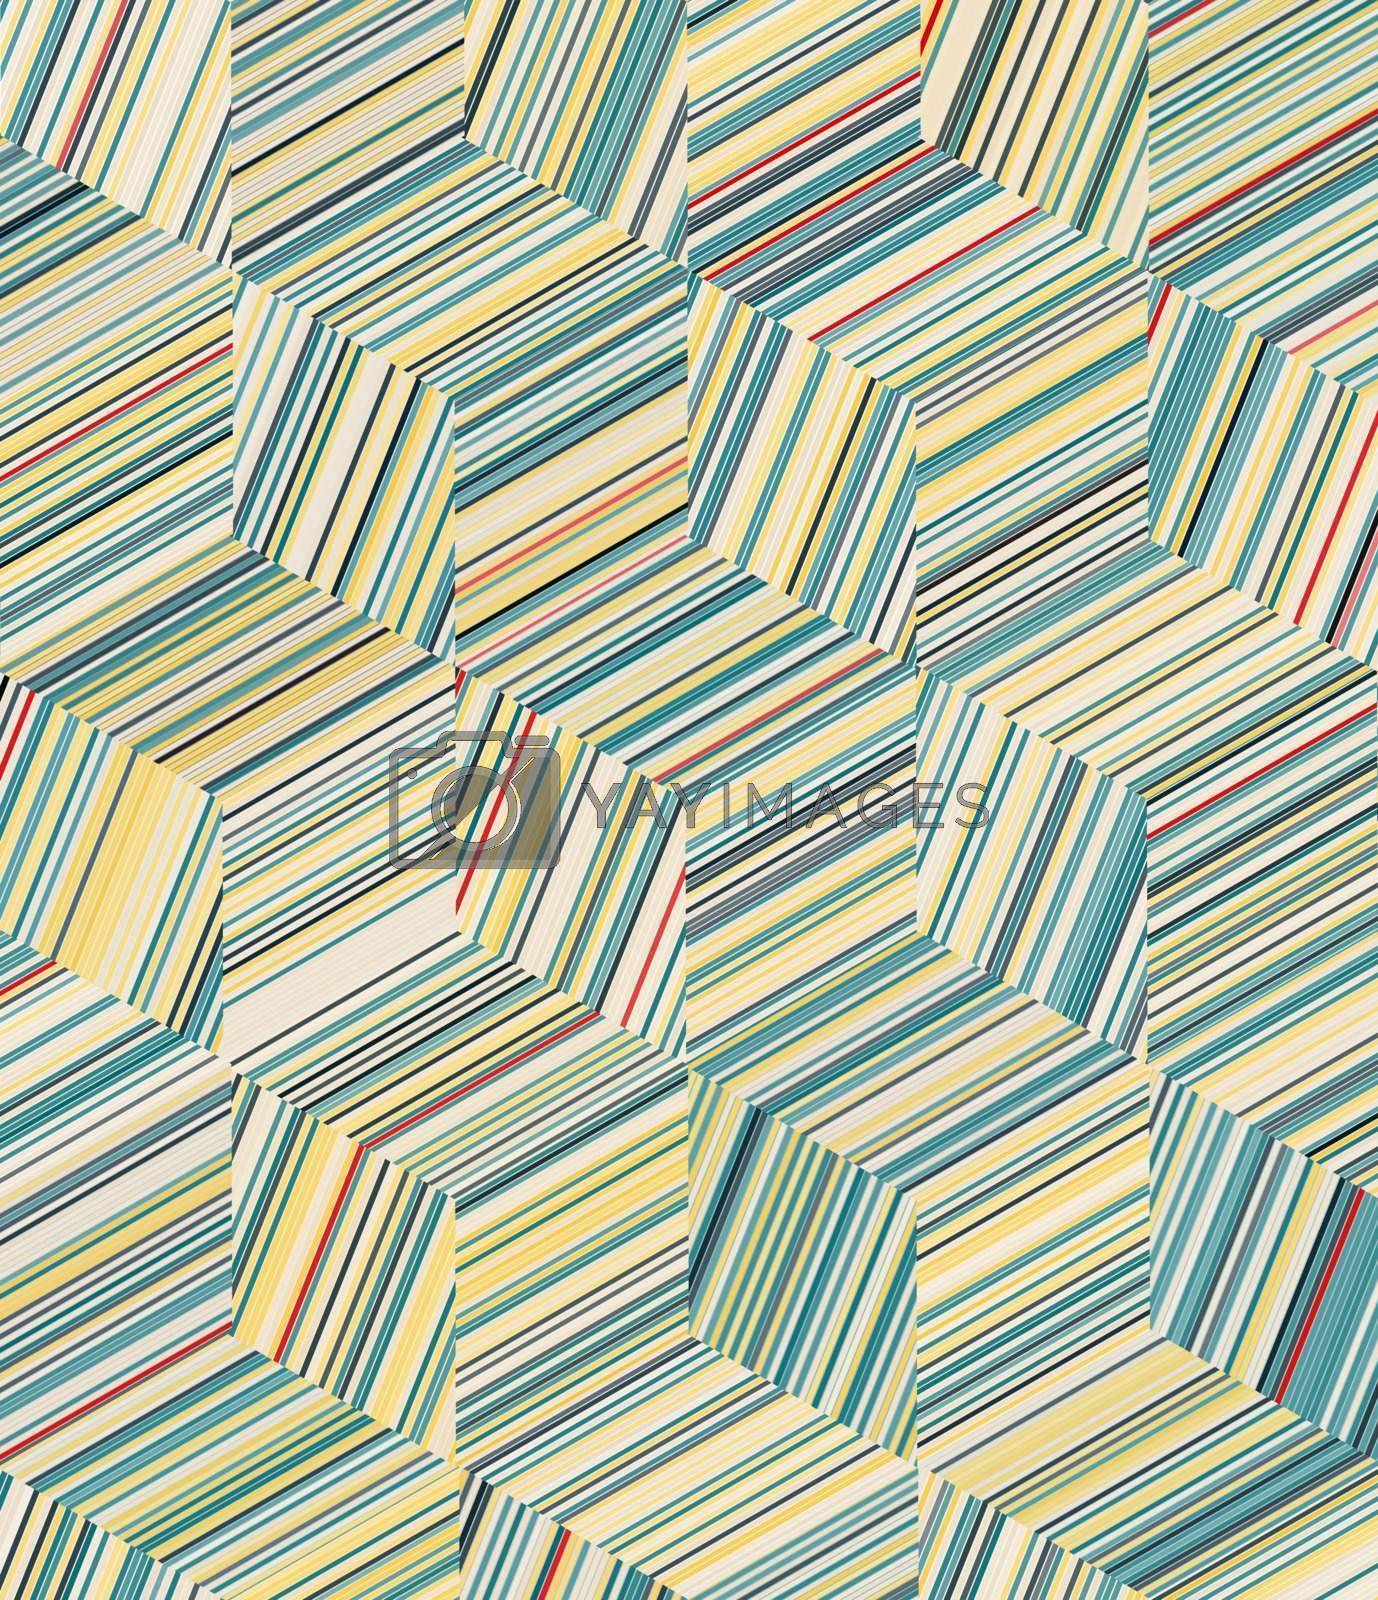 Royalty free image of cubes pattern background by Tflex